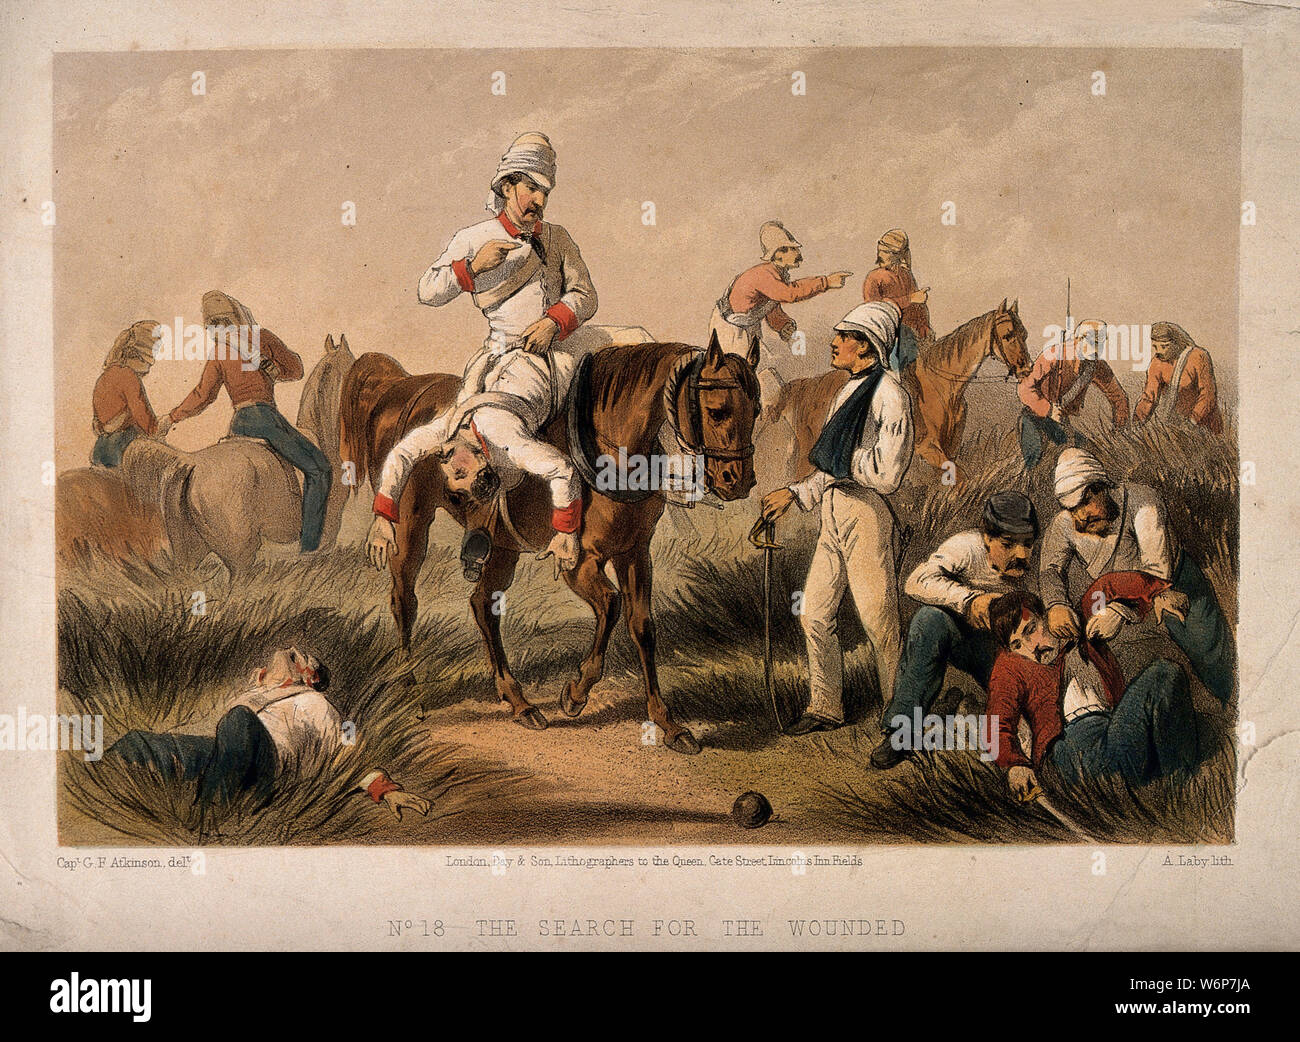 Indian Mutiny ambulancemen and soldiers searching for and assisting the wounded. Coloured lithograph by A. Laby, 1859, after G.F. Atkinson. Stock Photo